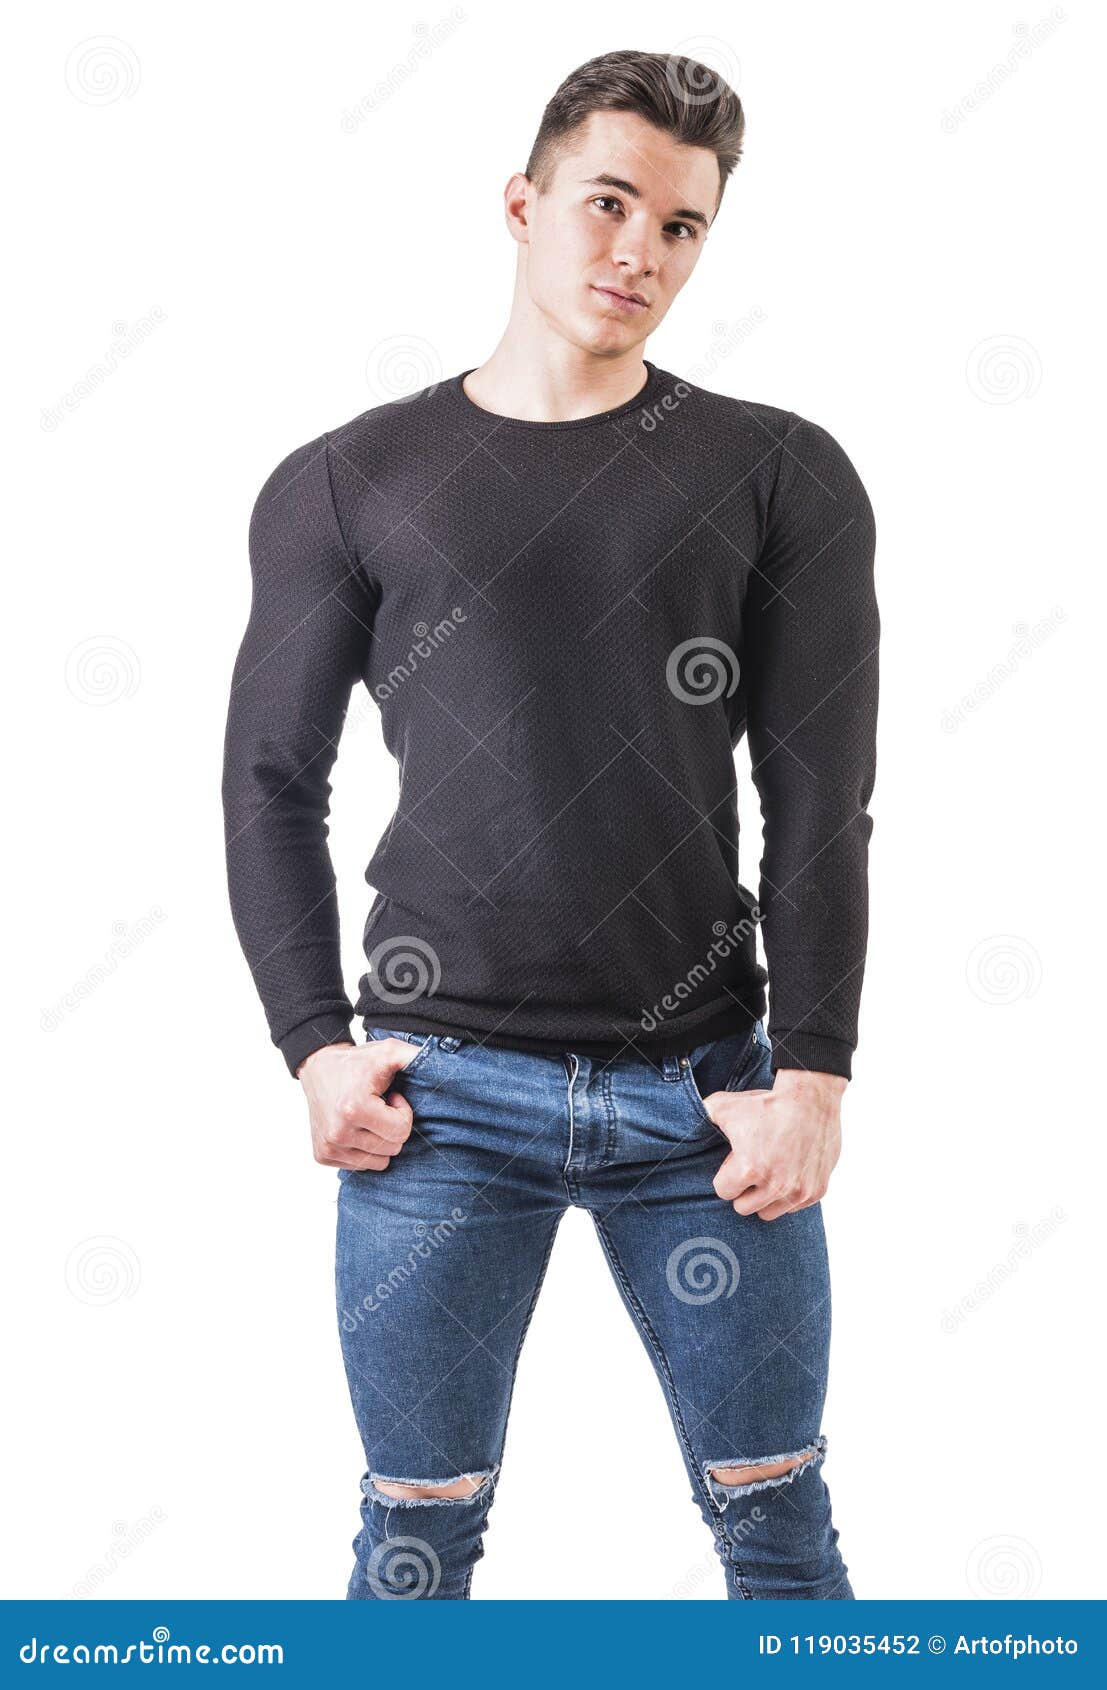 Handsome Young Muscular Man Looking at Camera Stock Photo - Image of ...